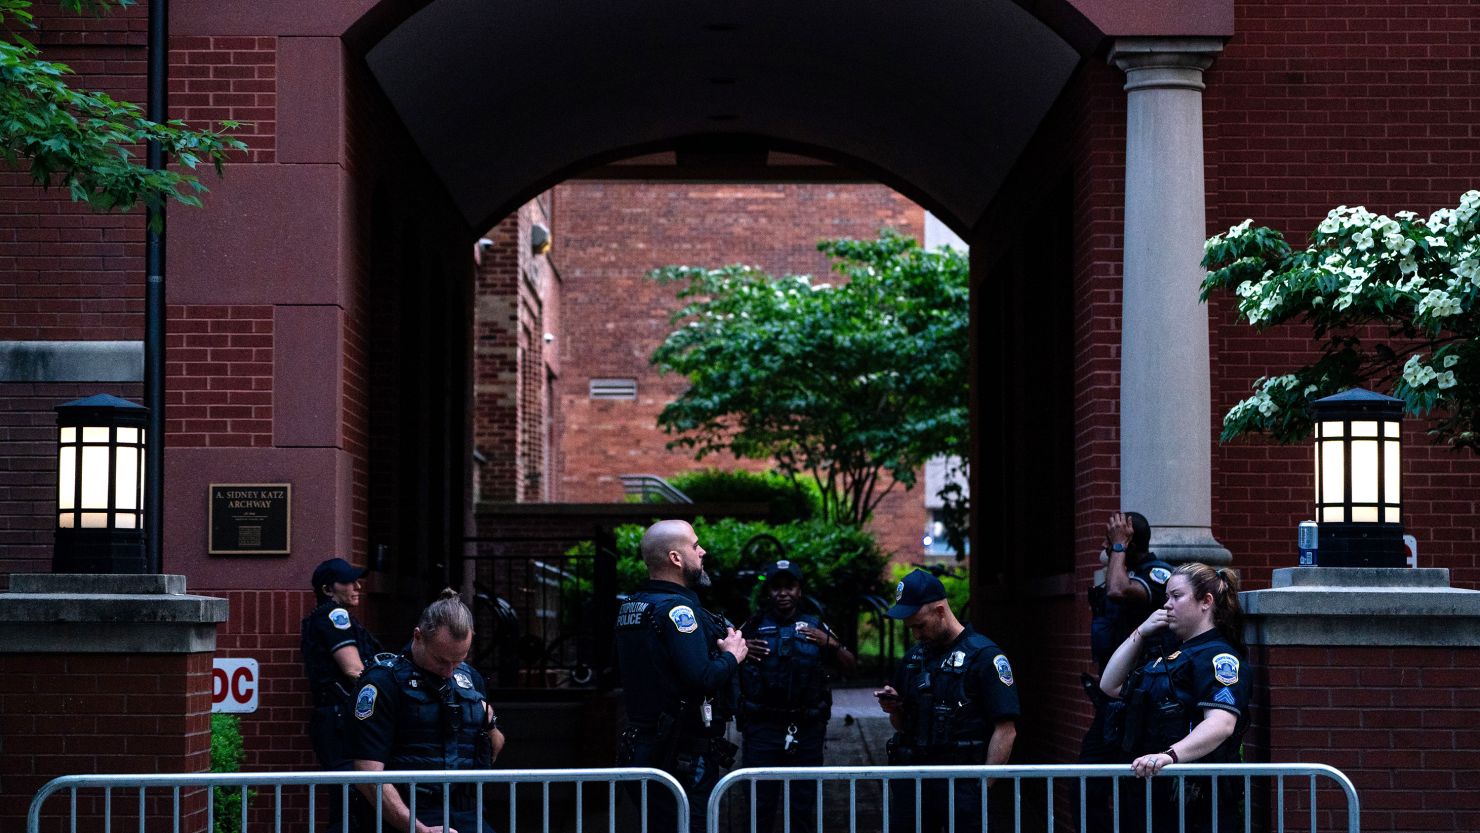 Law enforcement officers stand behind barricades where they cleared out a pro-Palestinian encampment Wednesday at George Washington University's University Yard.